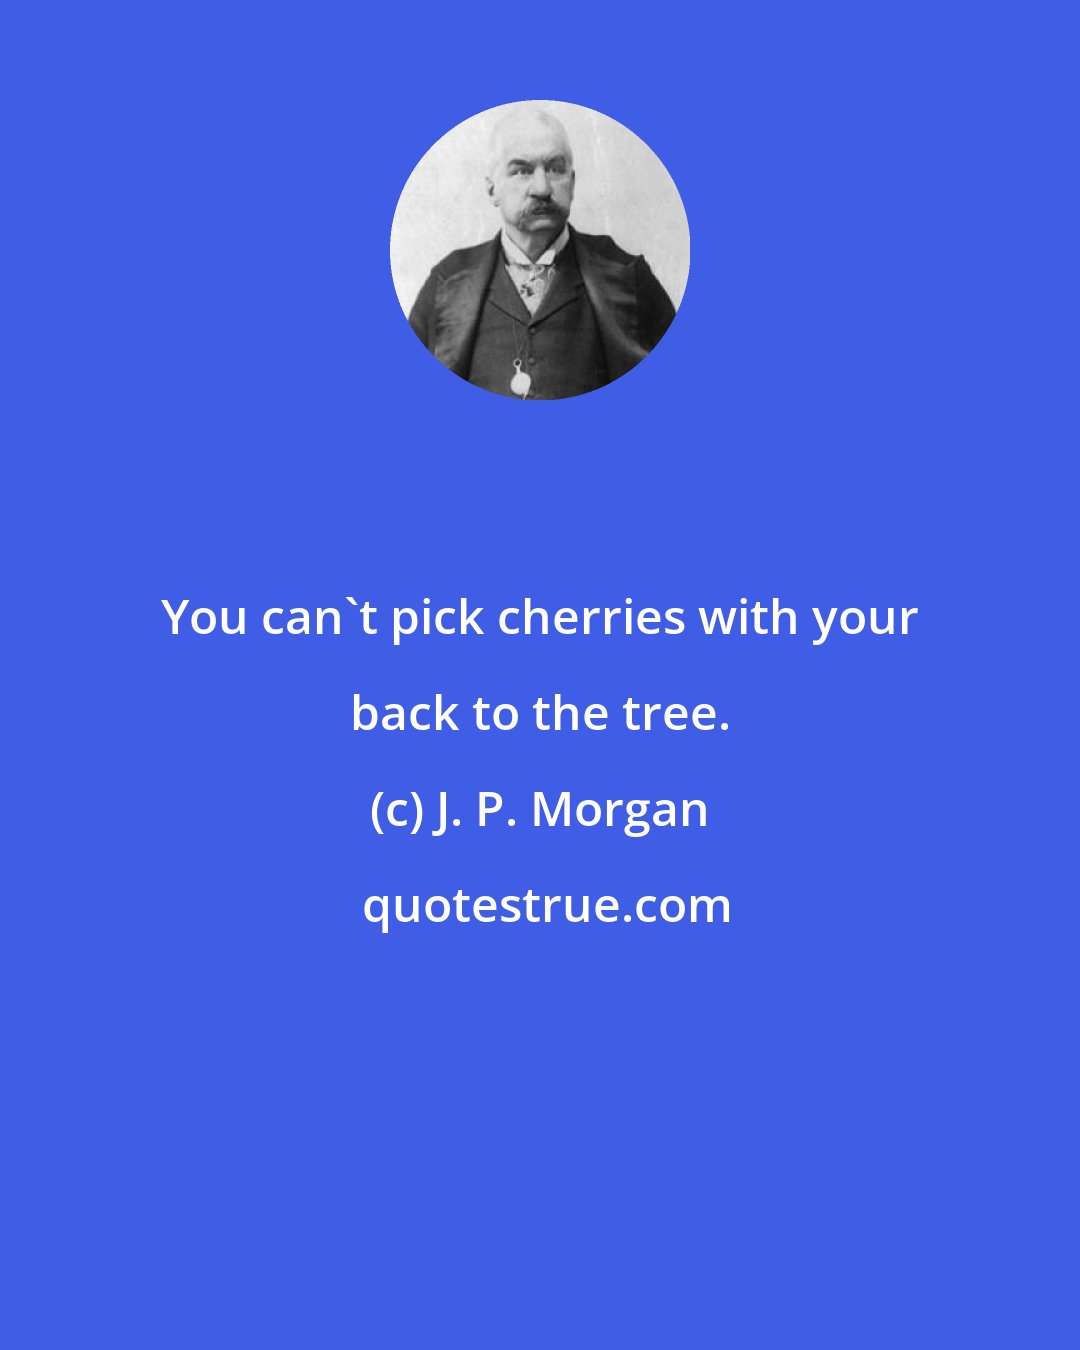 J. P. Morgan: You can't pick cherries with your back to the tree.